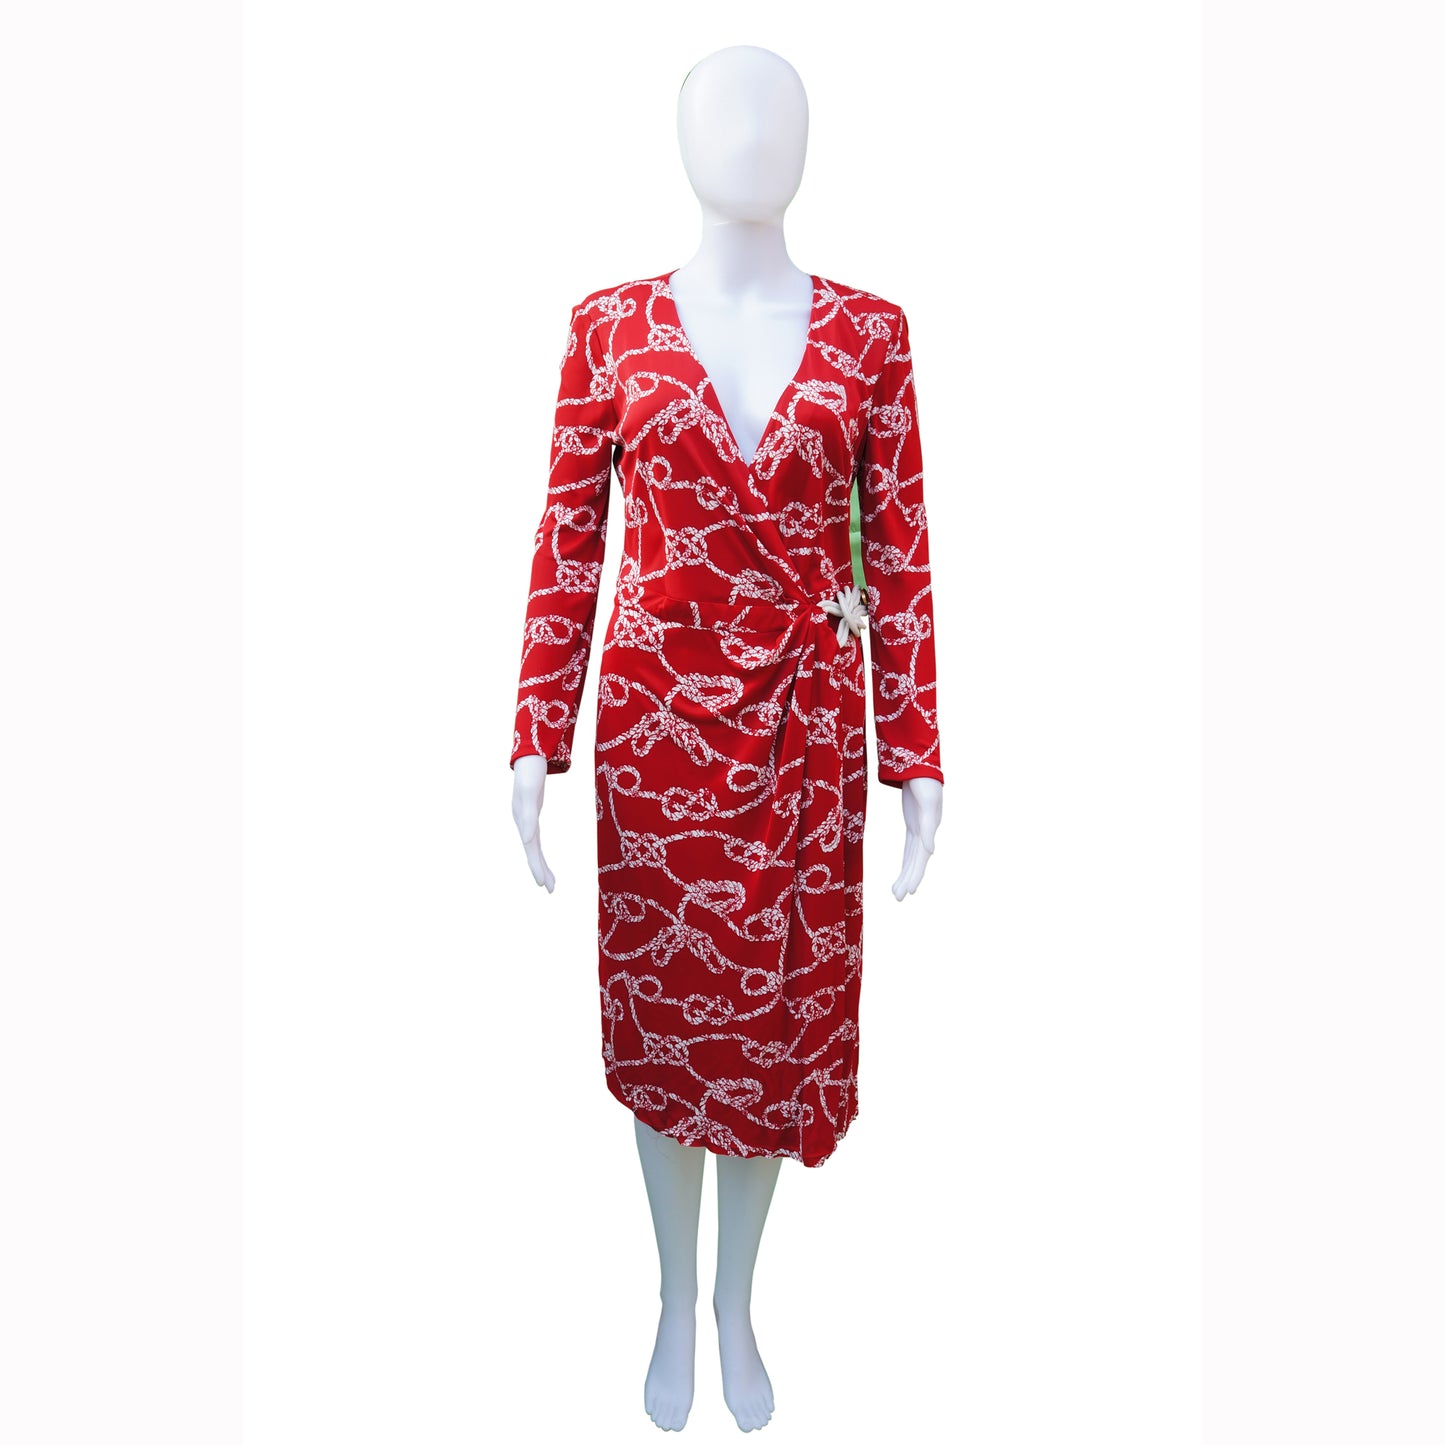 Gucci Wrap Red Rope Print Dress Long Sleeve Leather Tie